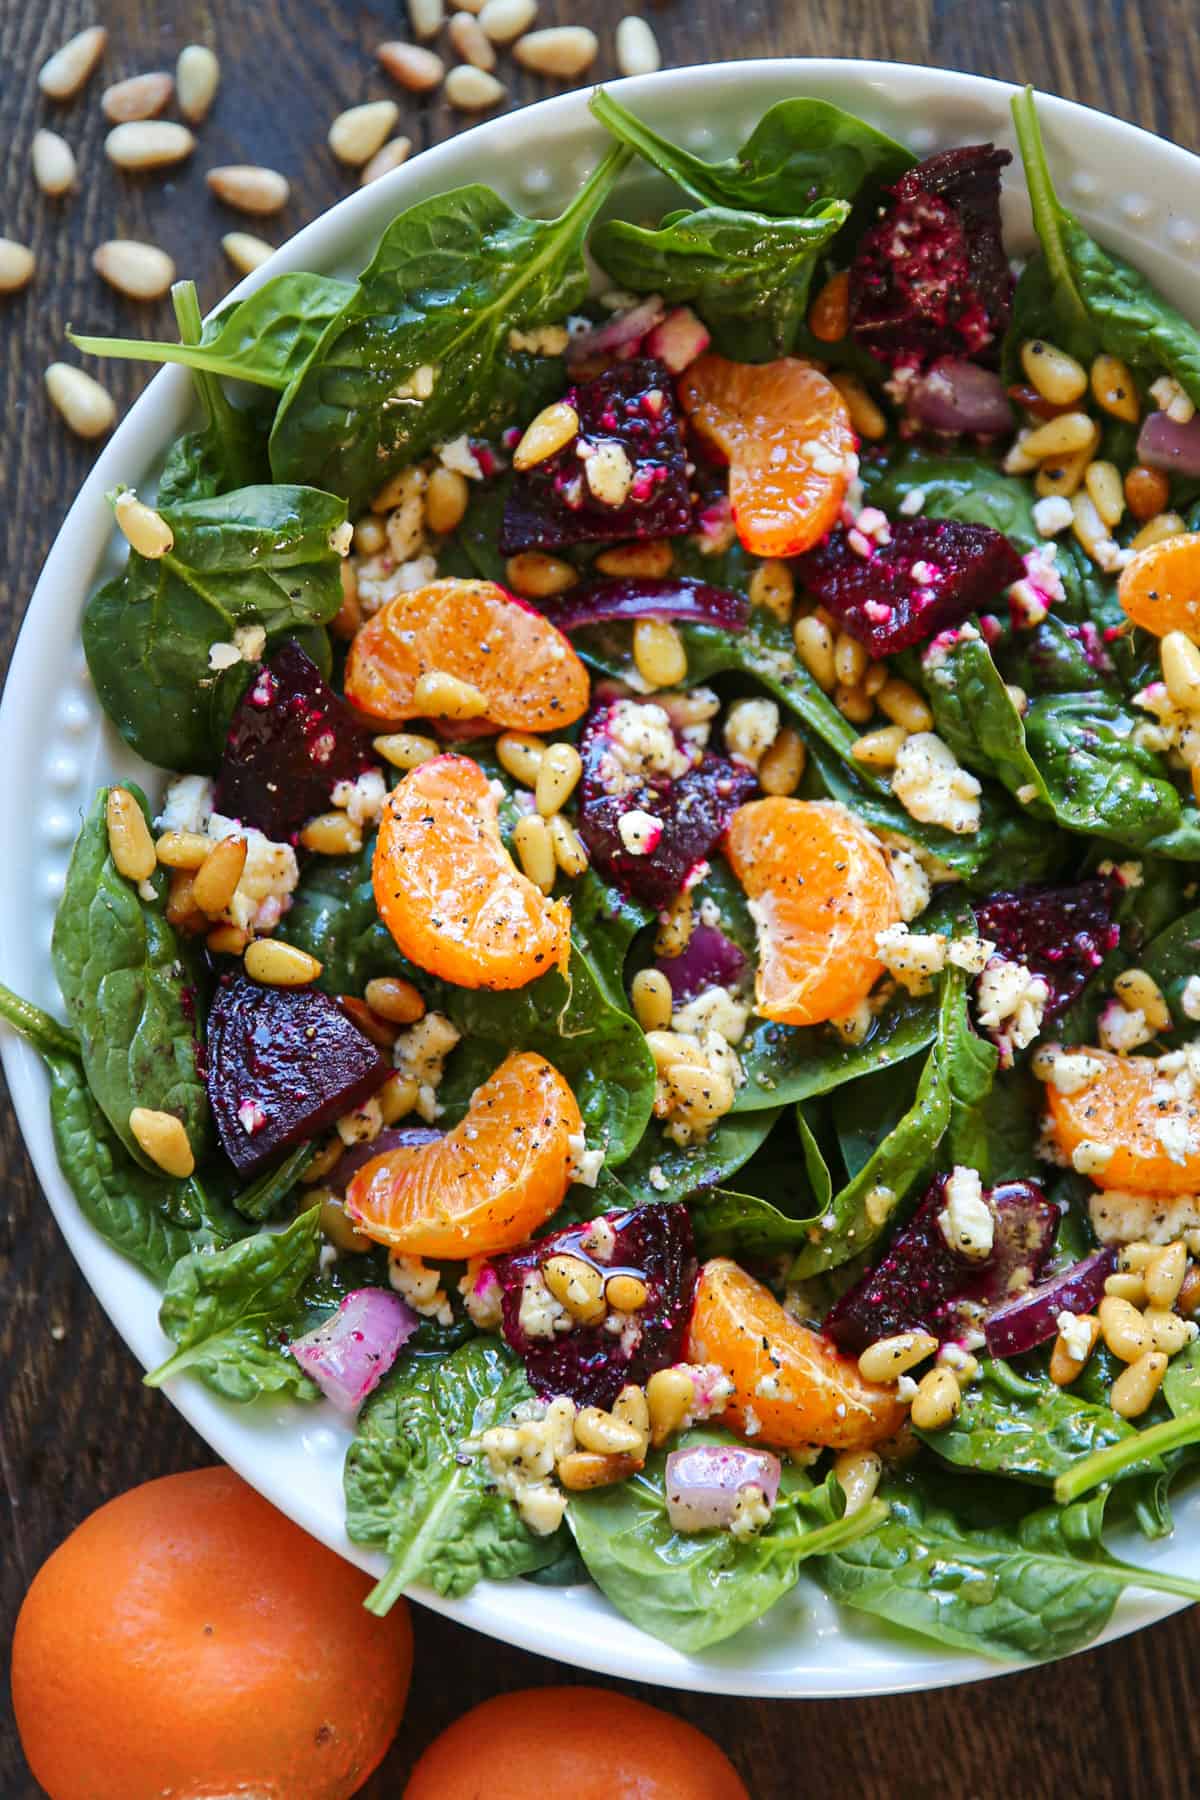 Beet Salad with spinach, mandarin oranges, red onion, pine nuts, feta cheese, and homemade Honey-Mustard Lemon Vinaigrette - in a white bowl.